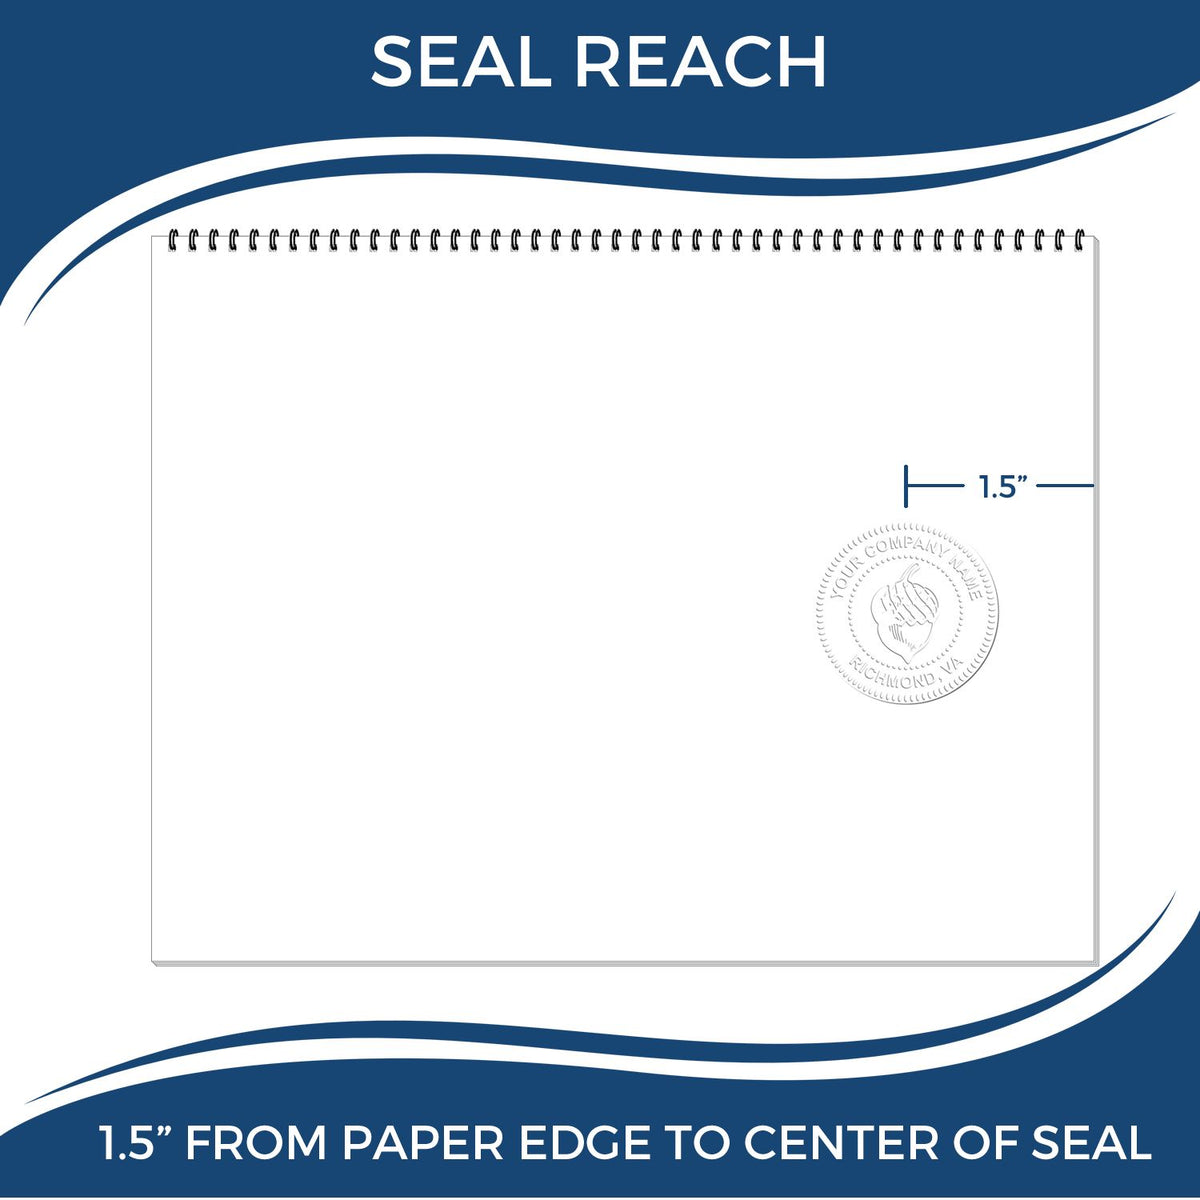 An infographic showing the seal reach which is represented by a ruler and a miniature seal image of the Soft Kentucky Professional Engineer Seal